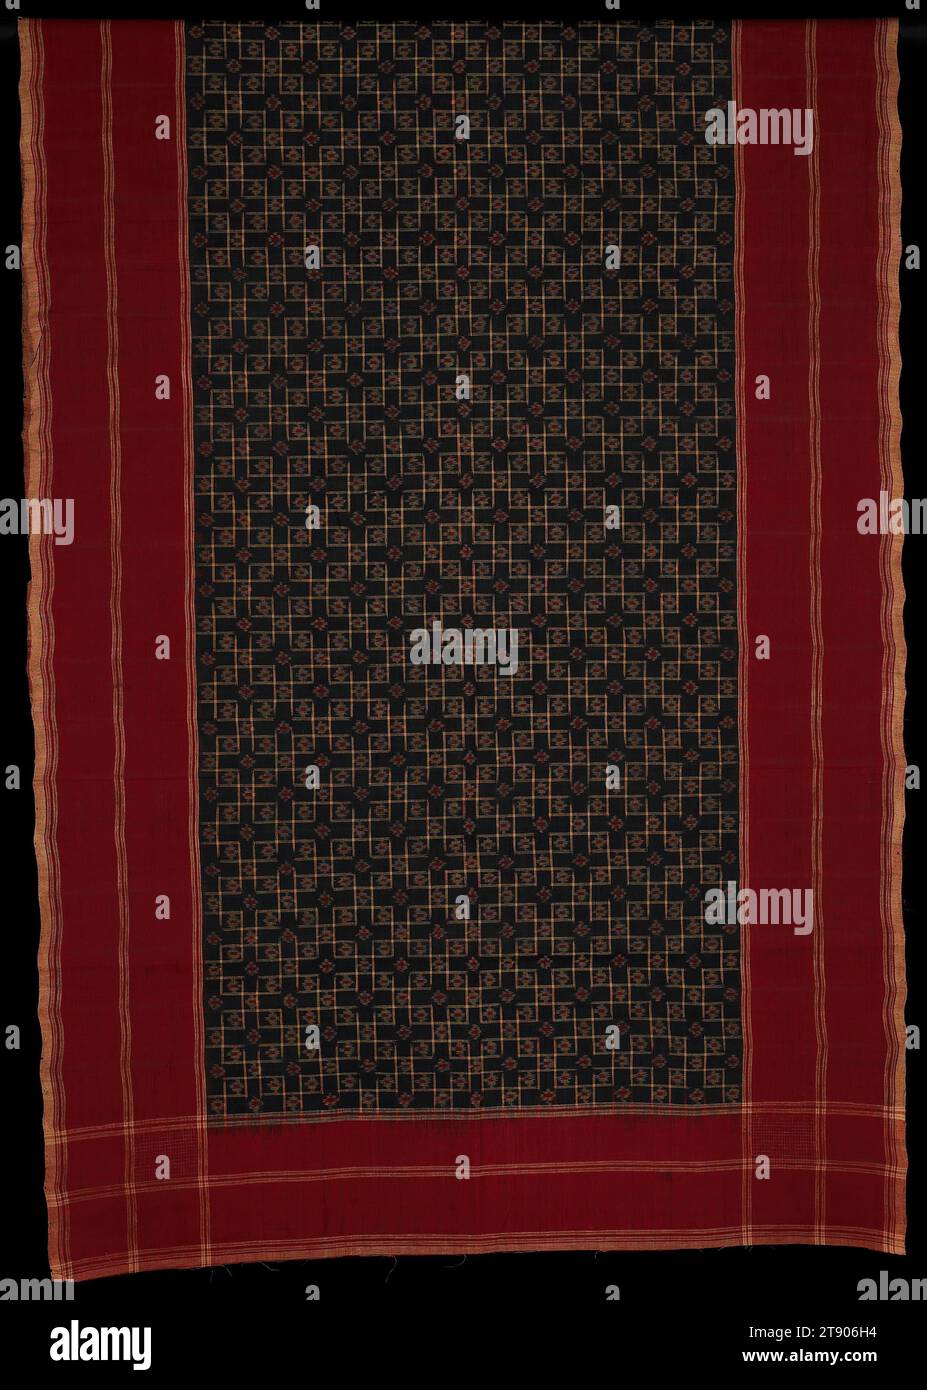 Cloth for woman's veil (Telia dupatta) or man's waist wrap (Telia lungi), late 19th-early 20th century, 109 1/2 x 47 5/16 in. (278.13 x 120.17 cm), Cotton; double ikat (Telia cloth), India, 19th-20th century, This cotton ikat fabric is from an unused stockpile of similar telia cloth - so-called because the traditional dyeing process involved treating the threads with sesame oil (tel). Produced in the southeast Indian coastal town of Chirala, telia cloth found a ready market in Hyderabad, the area's main trade center. Stock Photo